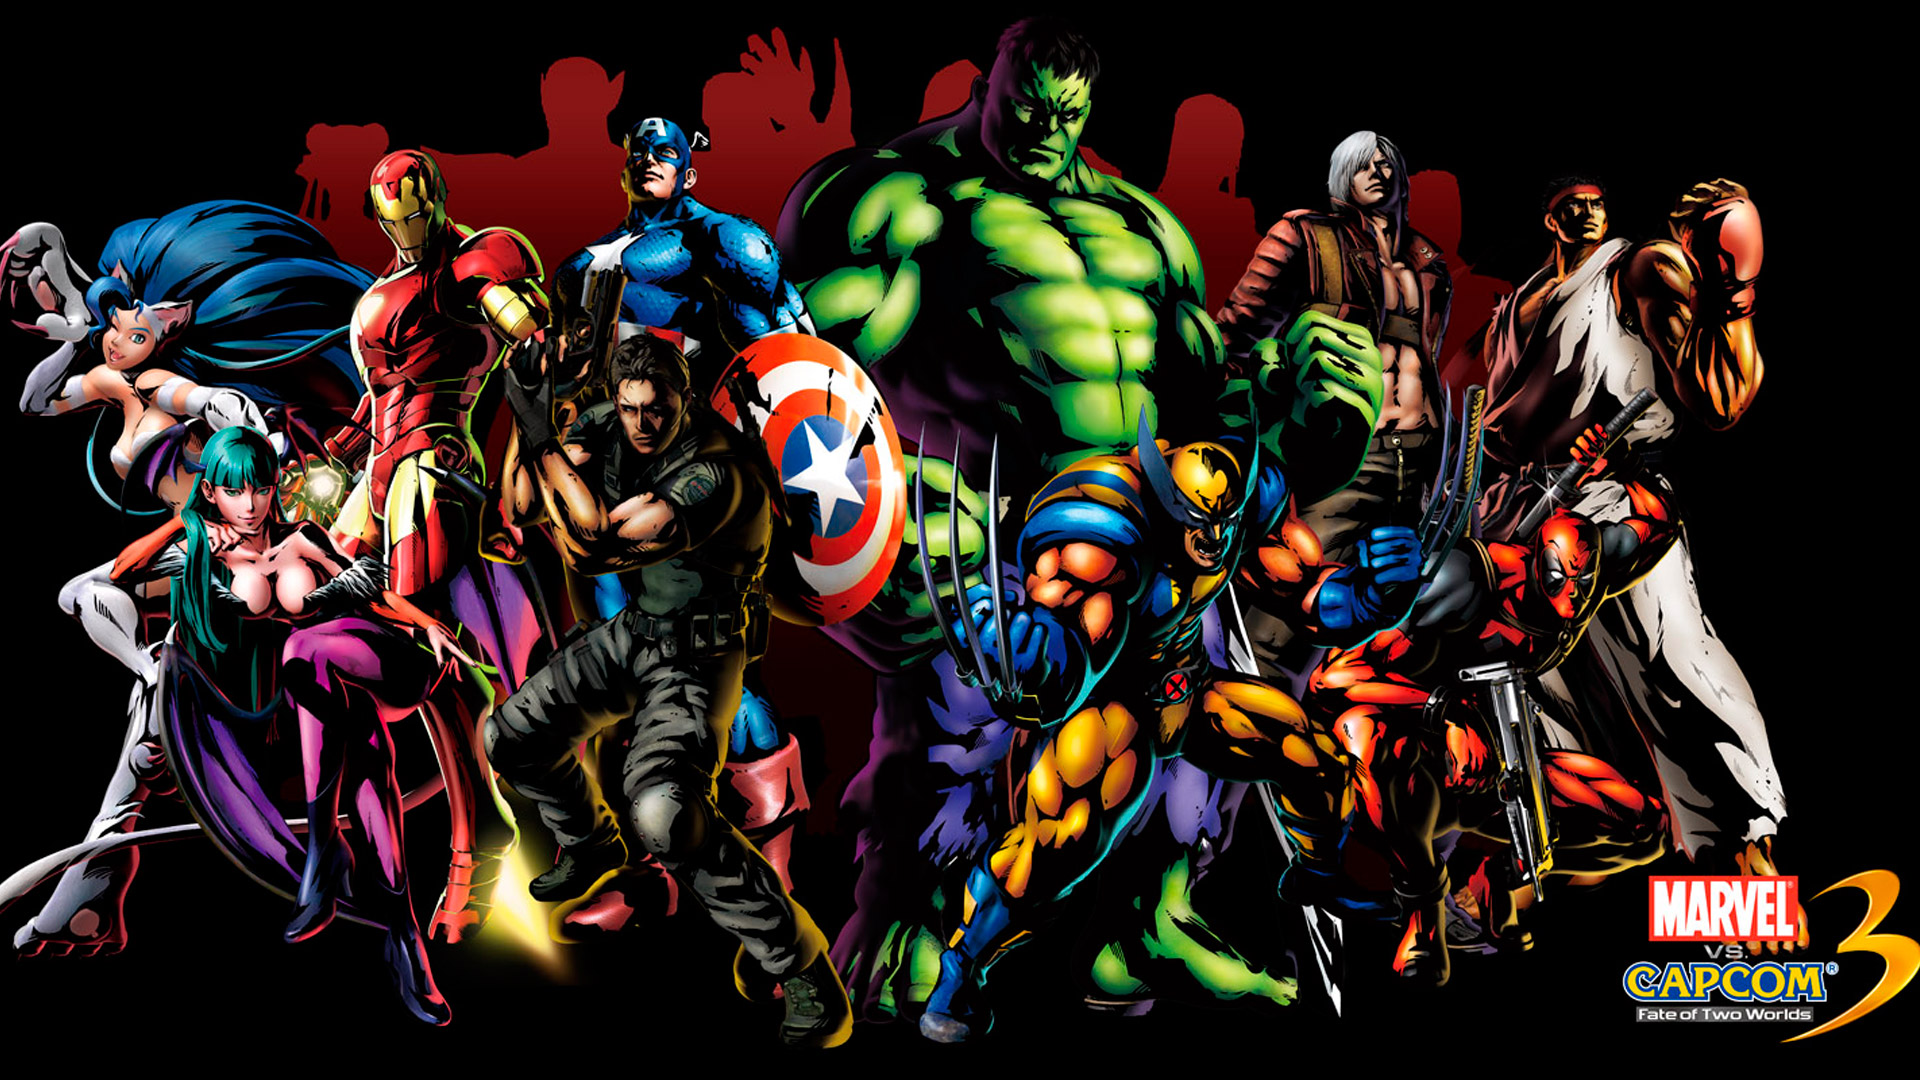 Marvel vs. Capcom 3: Fate of Two Worlds Wallpapers